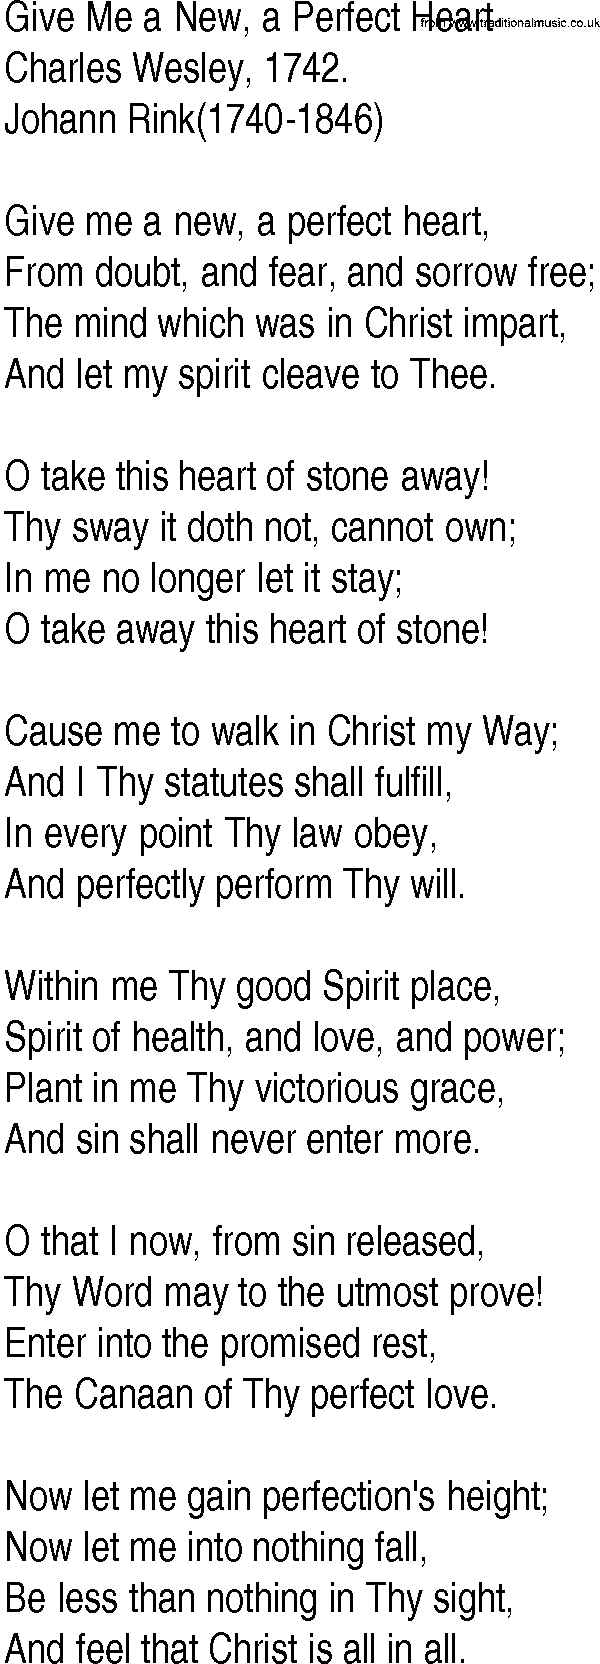 Hymn and Gospel Song: Give Me a New, a Perfect Heart by Charles Wesley lyrics